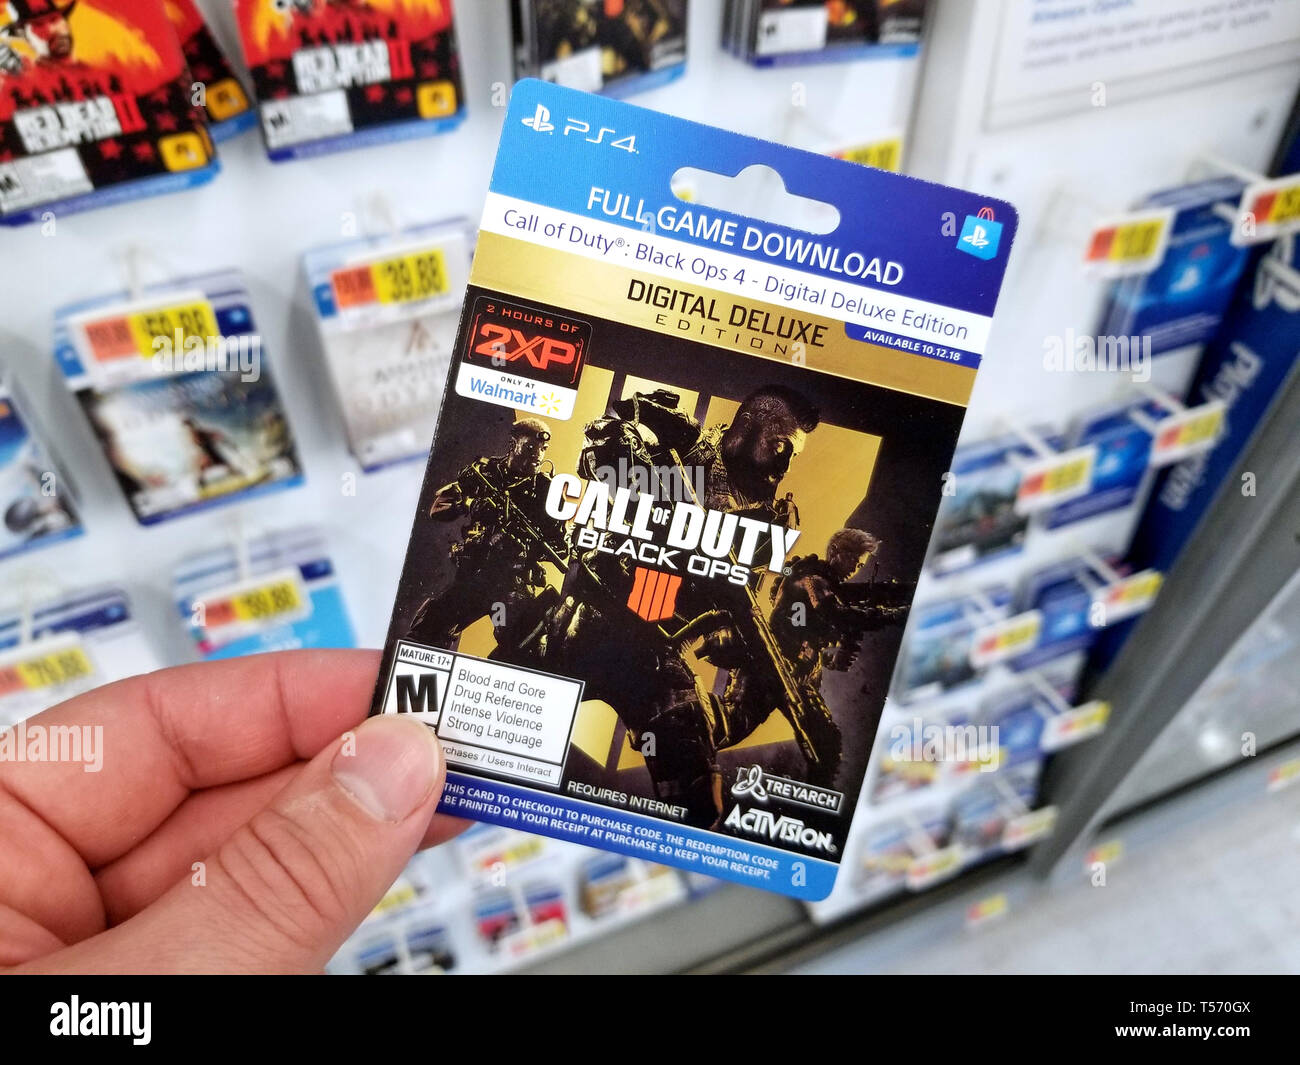 PLATTSBURGH, USA - JANUARY 21, 2019 : Gift card of Call of Duty Black Ops video game for PS4 in a hand of a buyer at Walmart store. Stock Photo